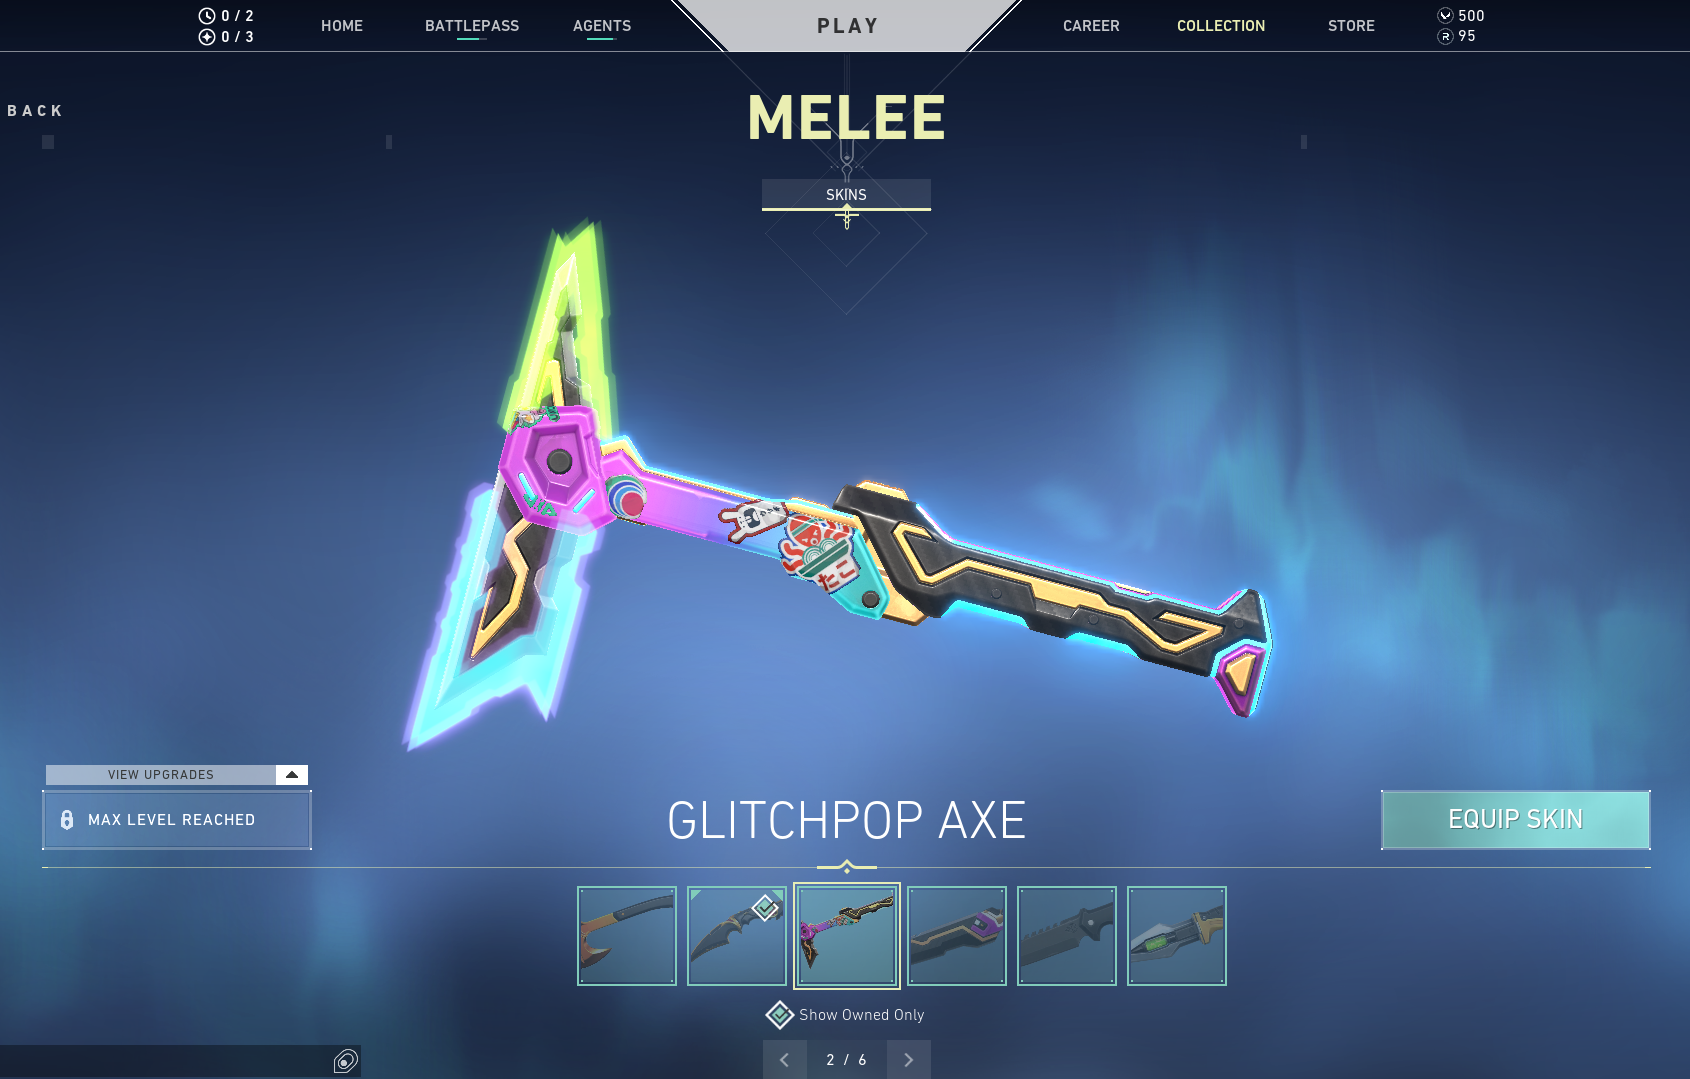 The Glitchpop knife skin for Valorant turns your sidearm into a psychedelic synthwave axe 